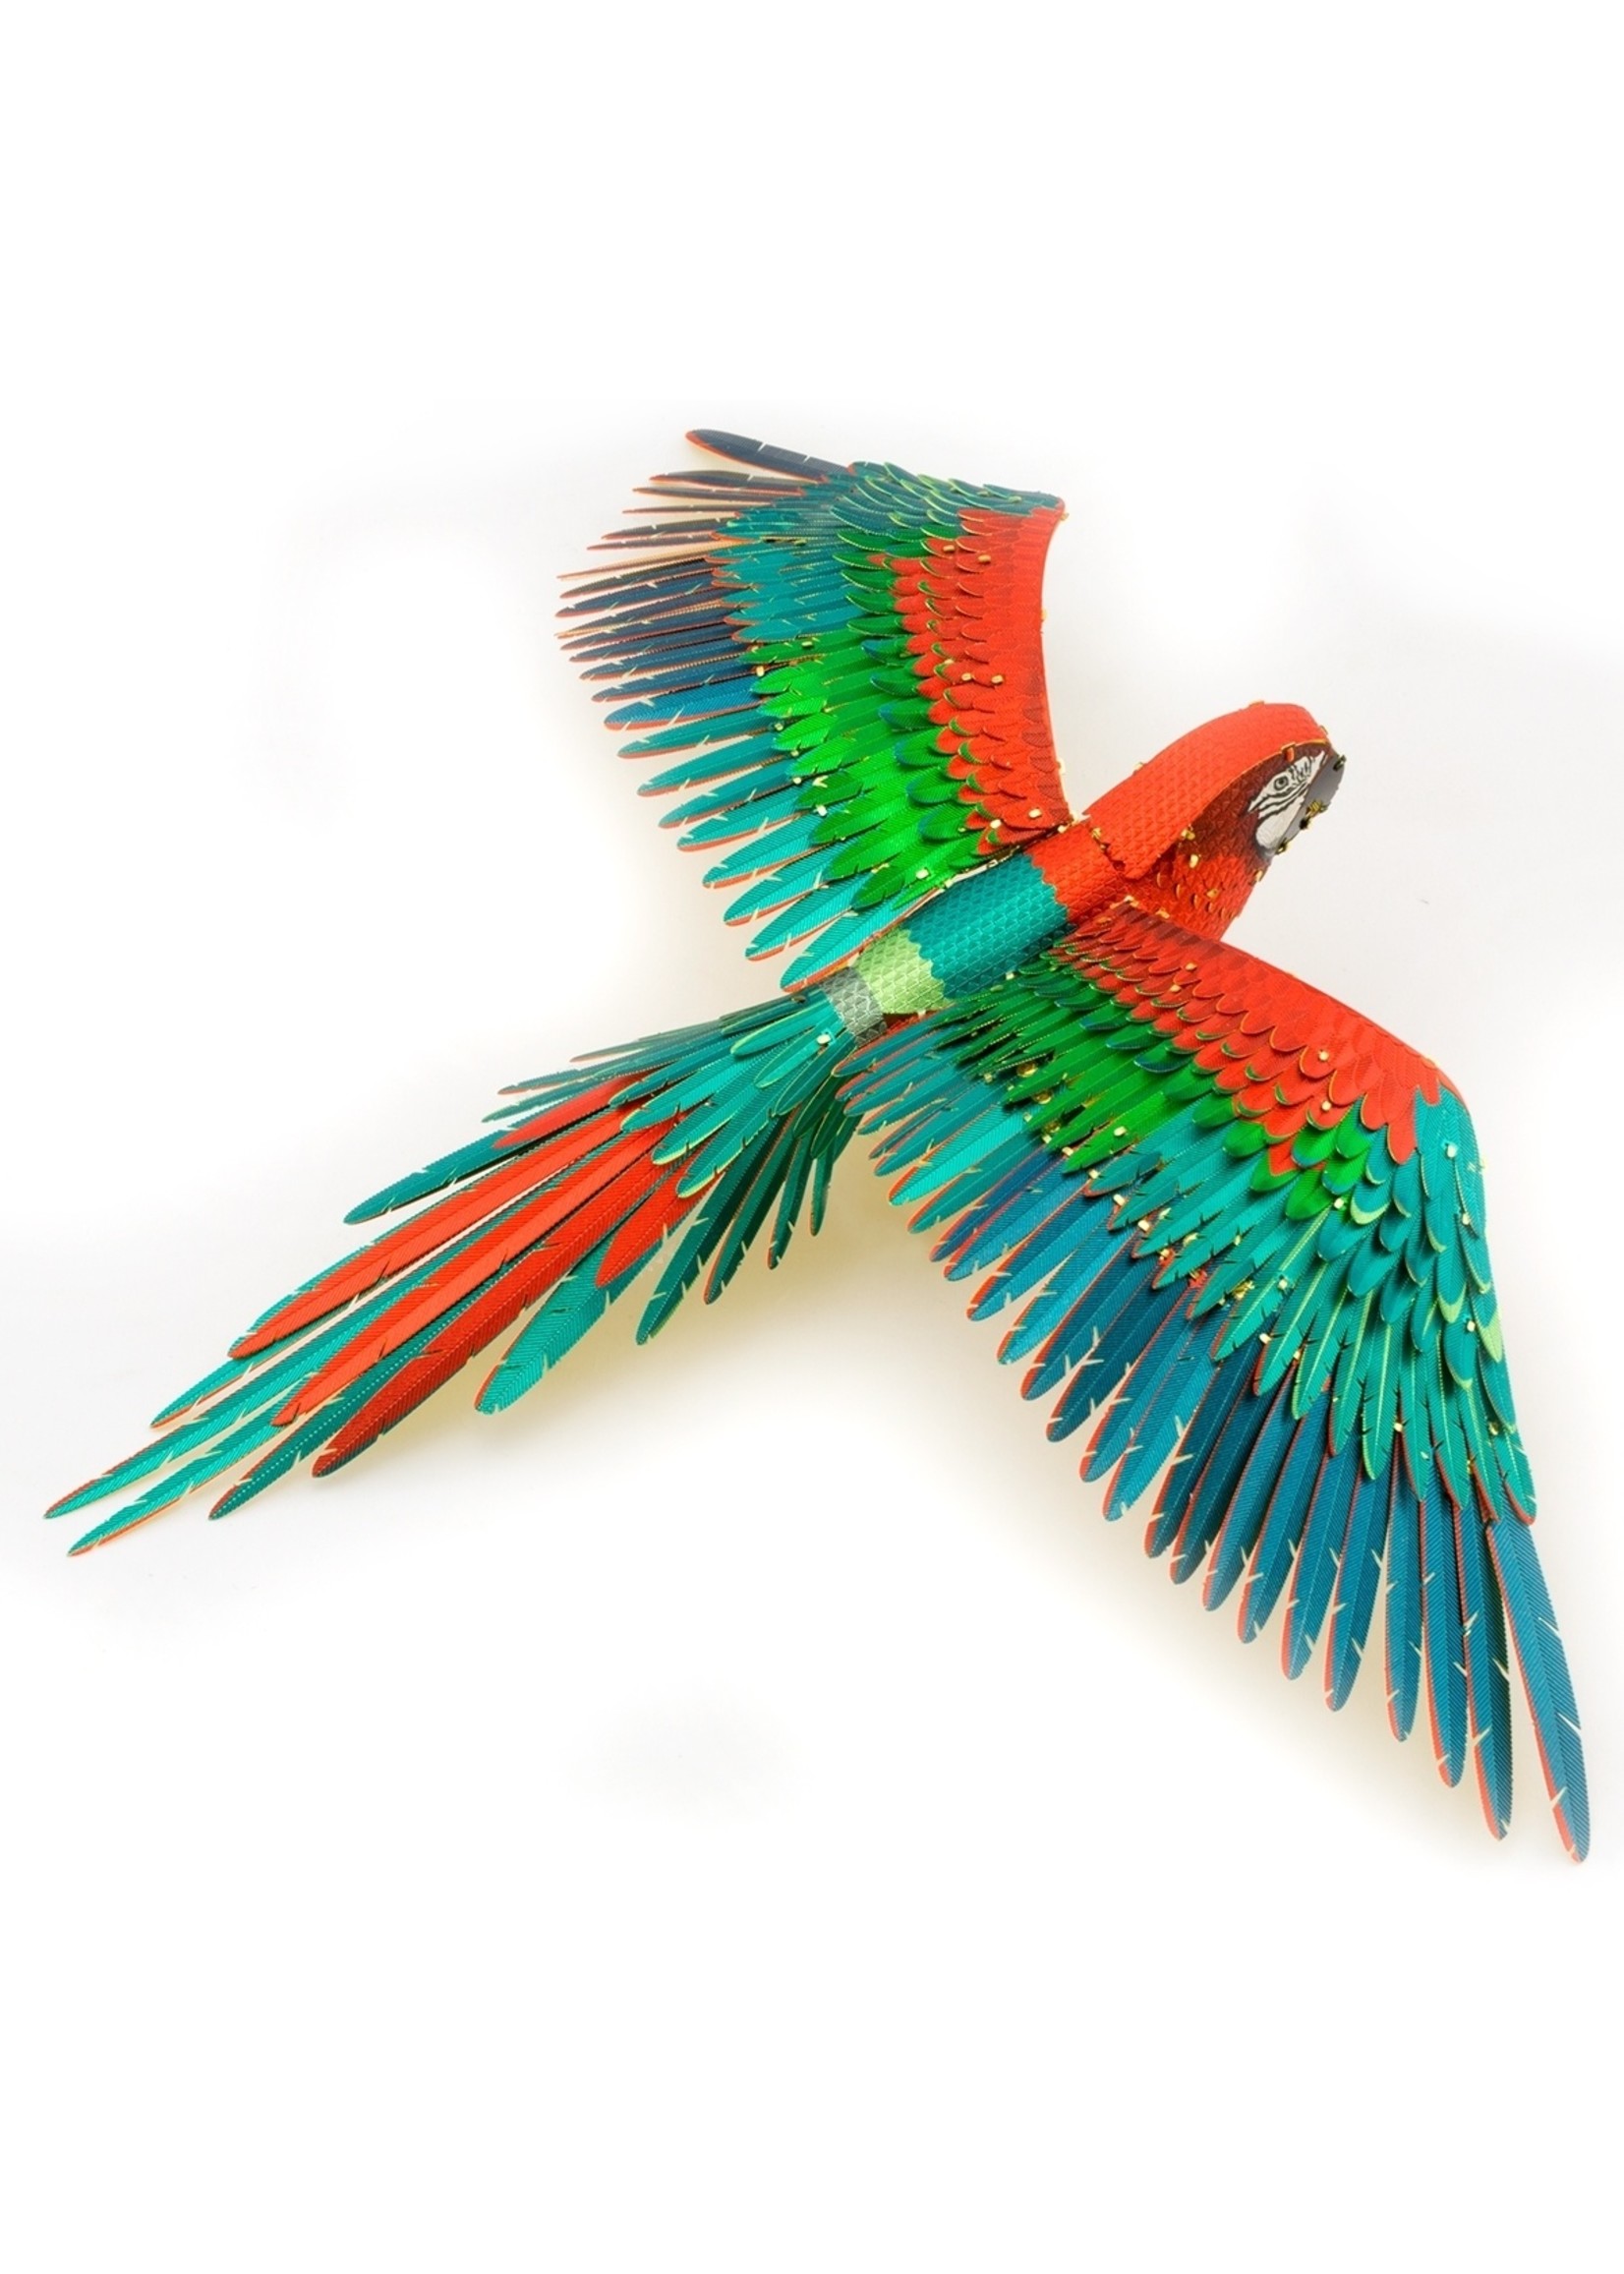 Fascinations Metal Earth - Parrot Jubilee Macaw ICX